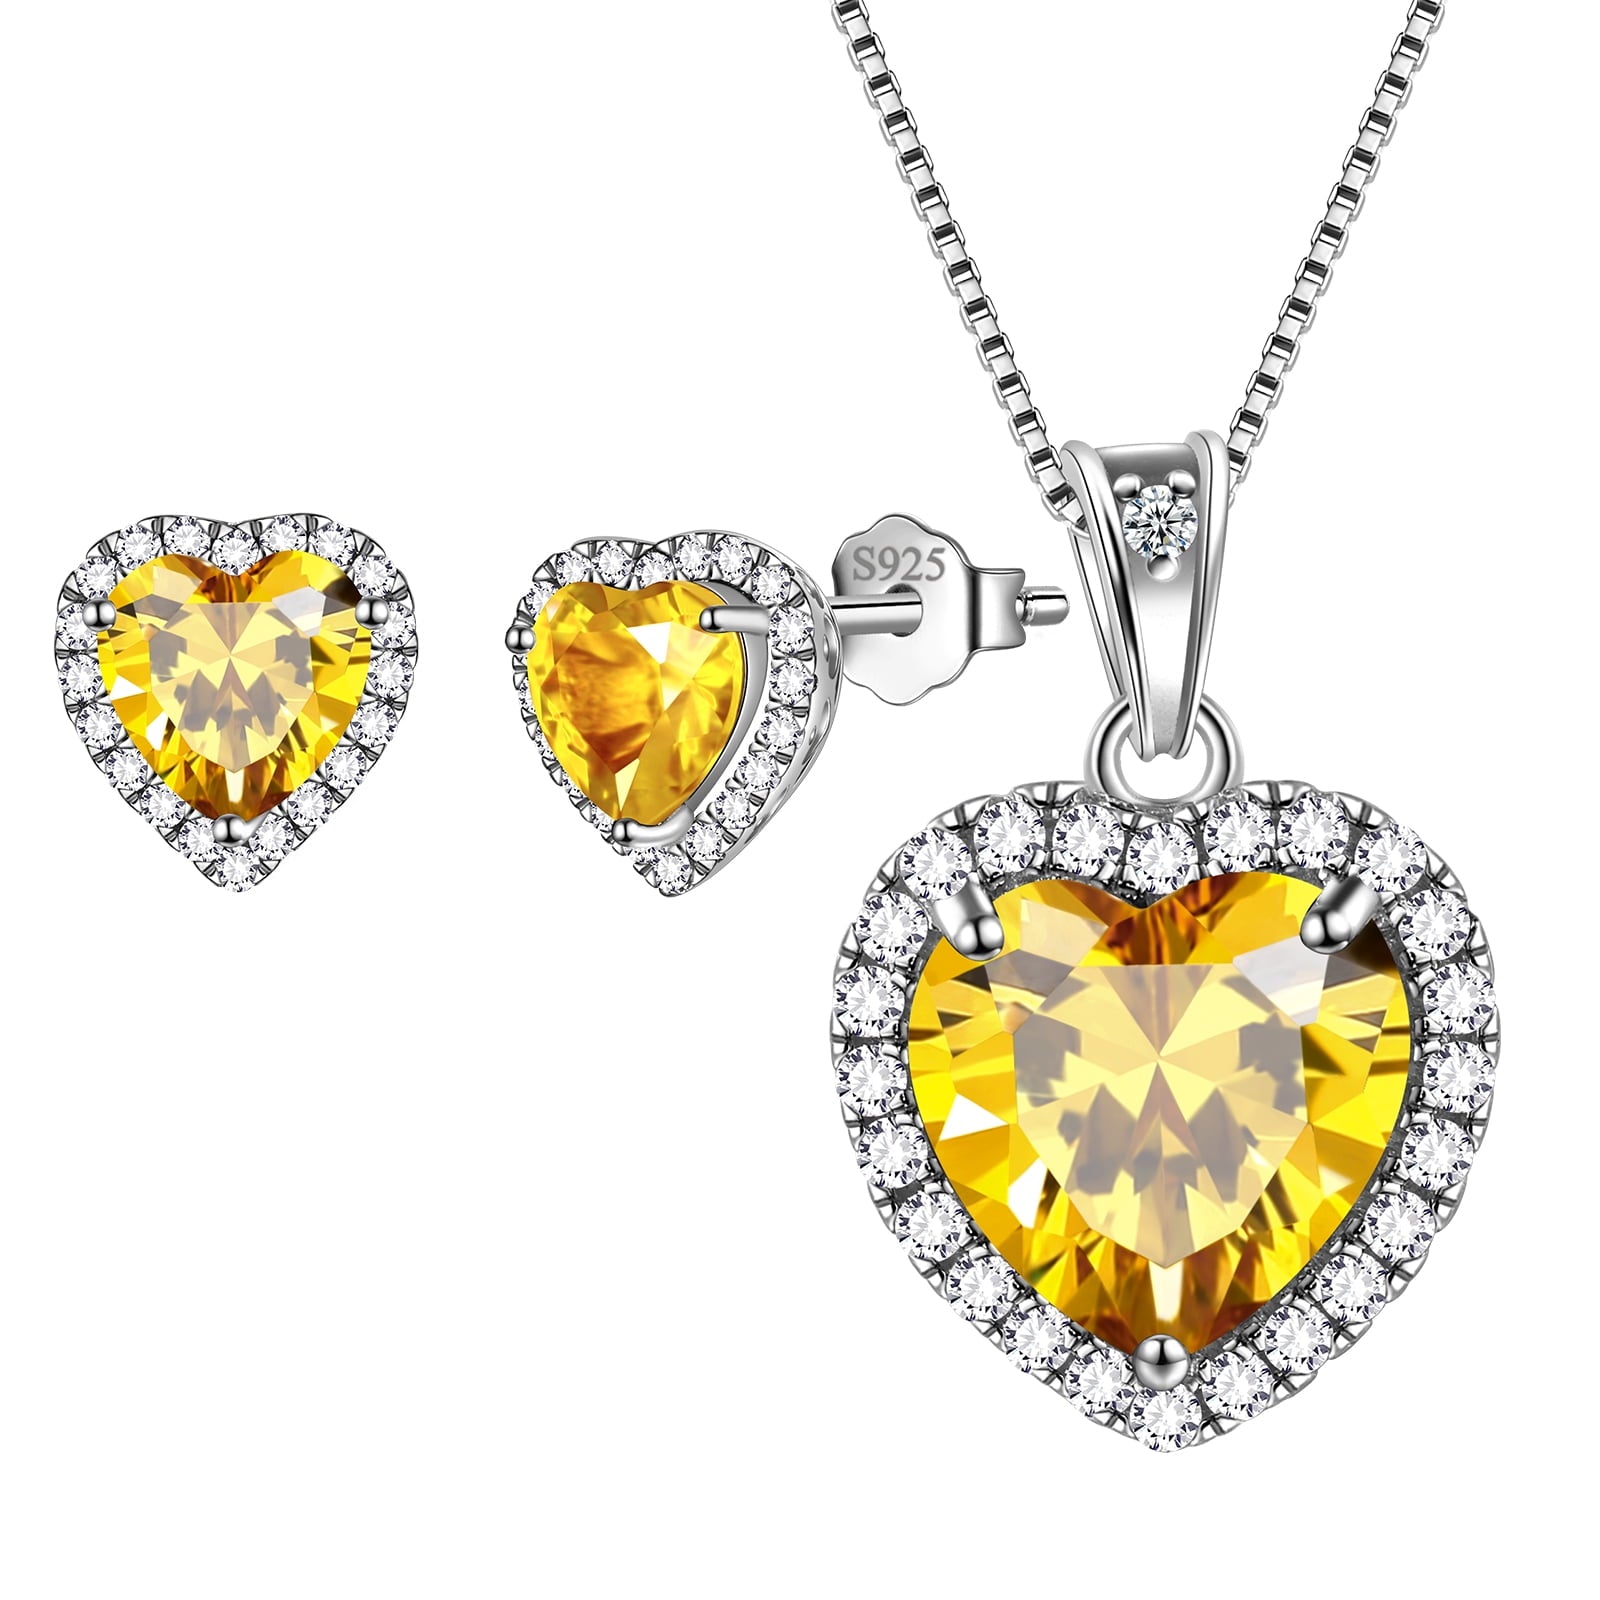 Yellow Heart Jewelry Sets for Women, Citrine November Birthstone Jewelry Set Necklace Earrings 925 Sterling Silver Jewelry Girls Birthday Valentine's Day Gifts